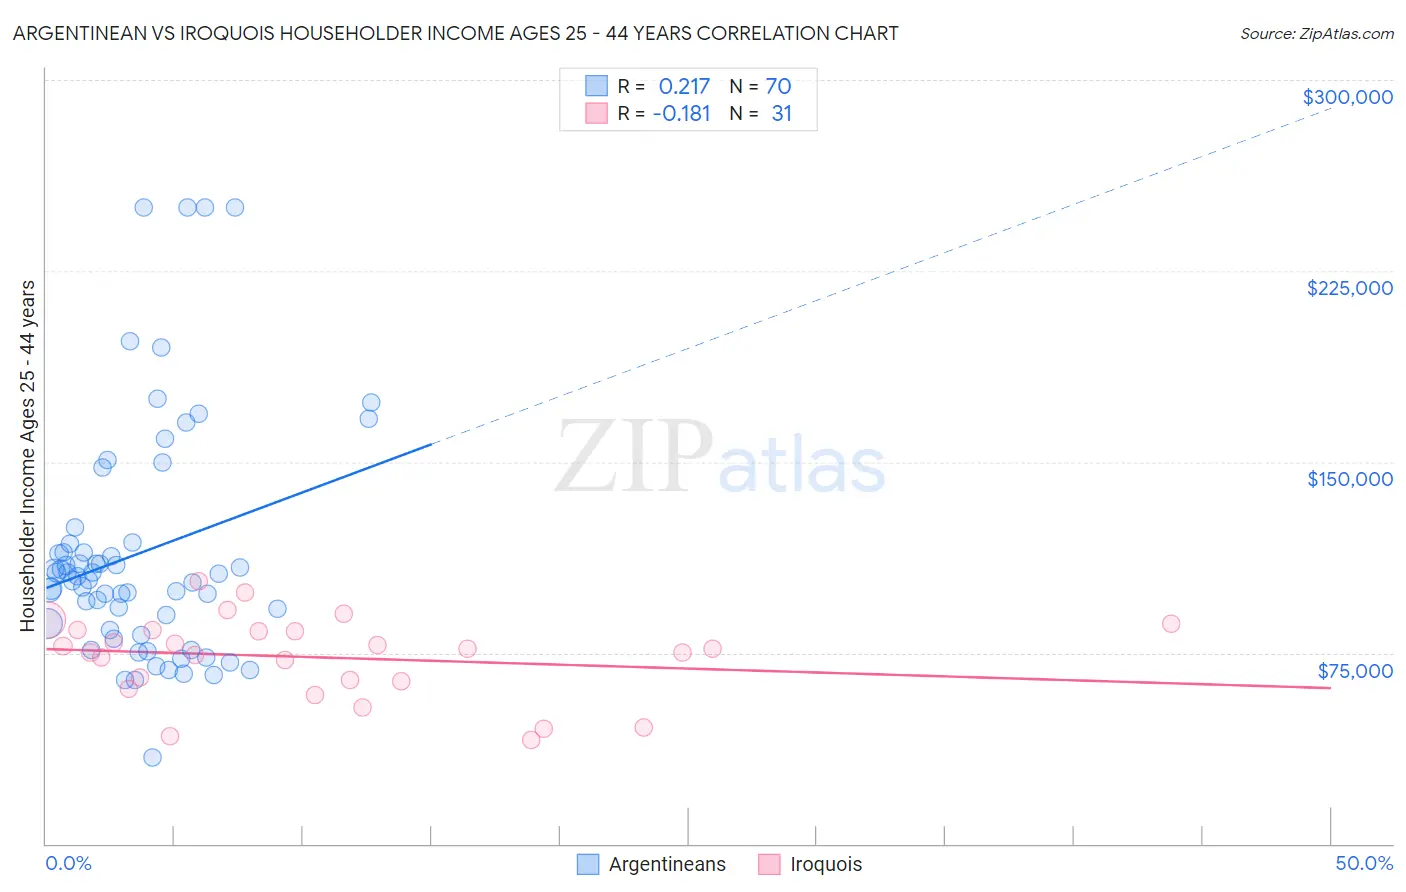 Argentinean vs Iroquois Householder Income Ages 25 - 44 years